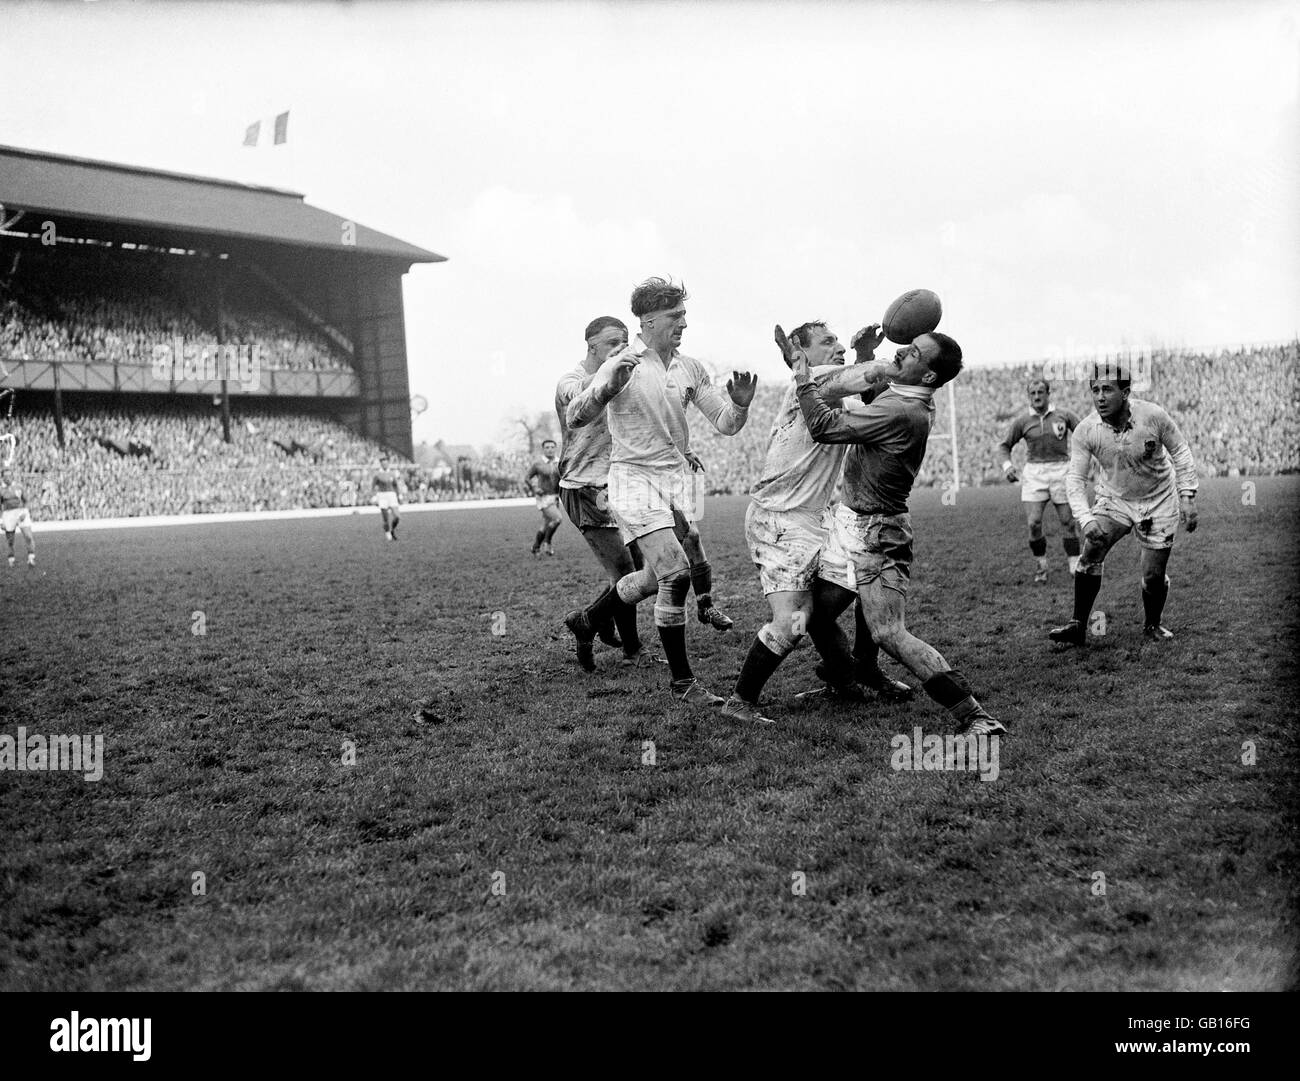 Rugby-Union - Five Nations Championship - England / Frankreich Stockfoto